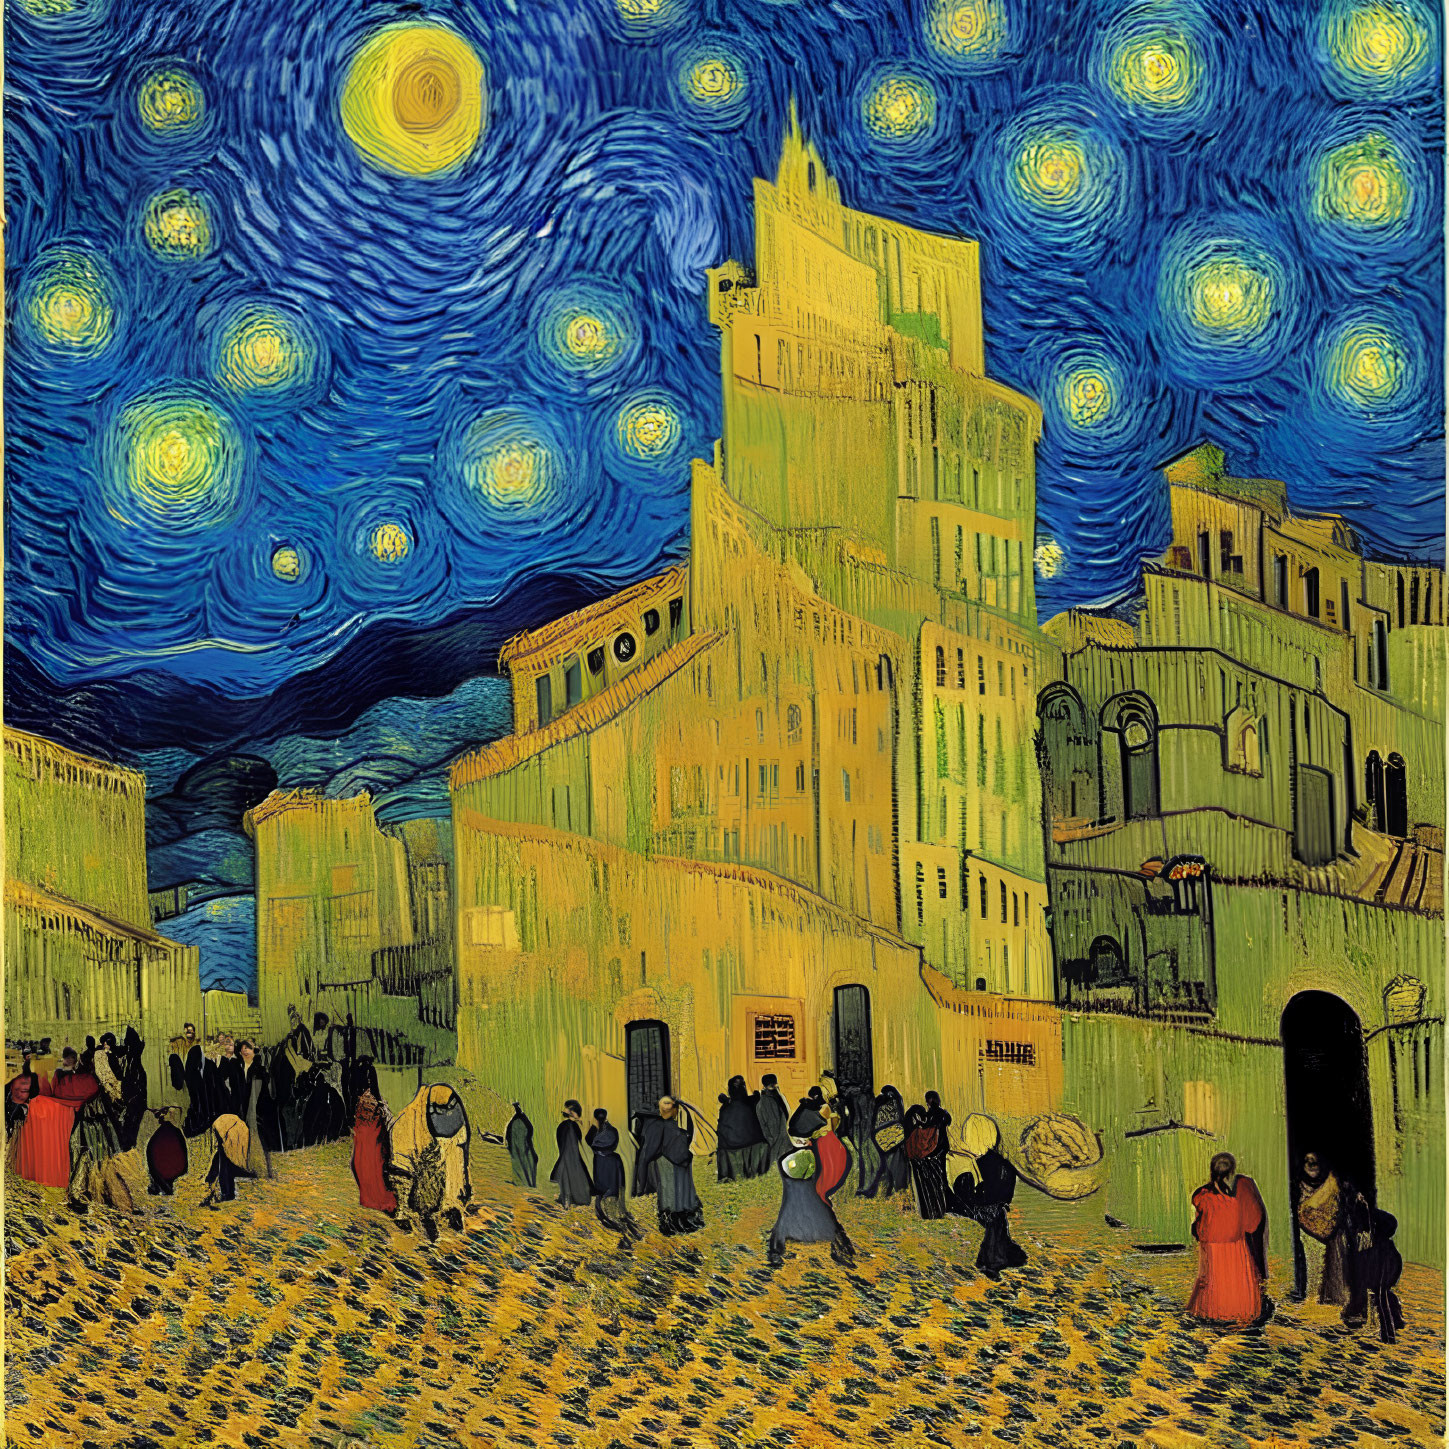 Interpretation of "Starry Night" in historical town square